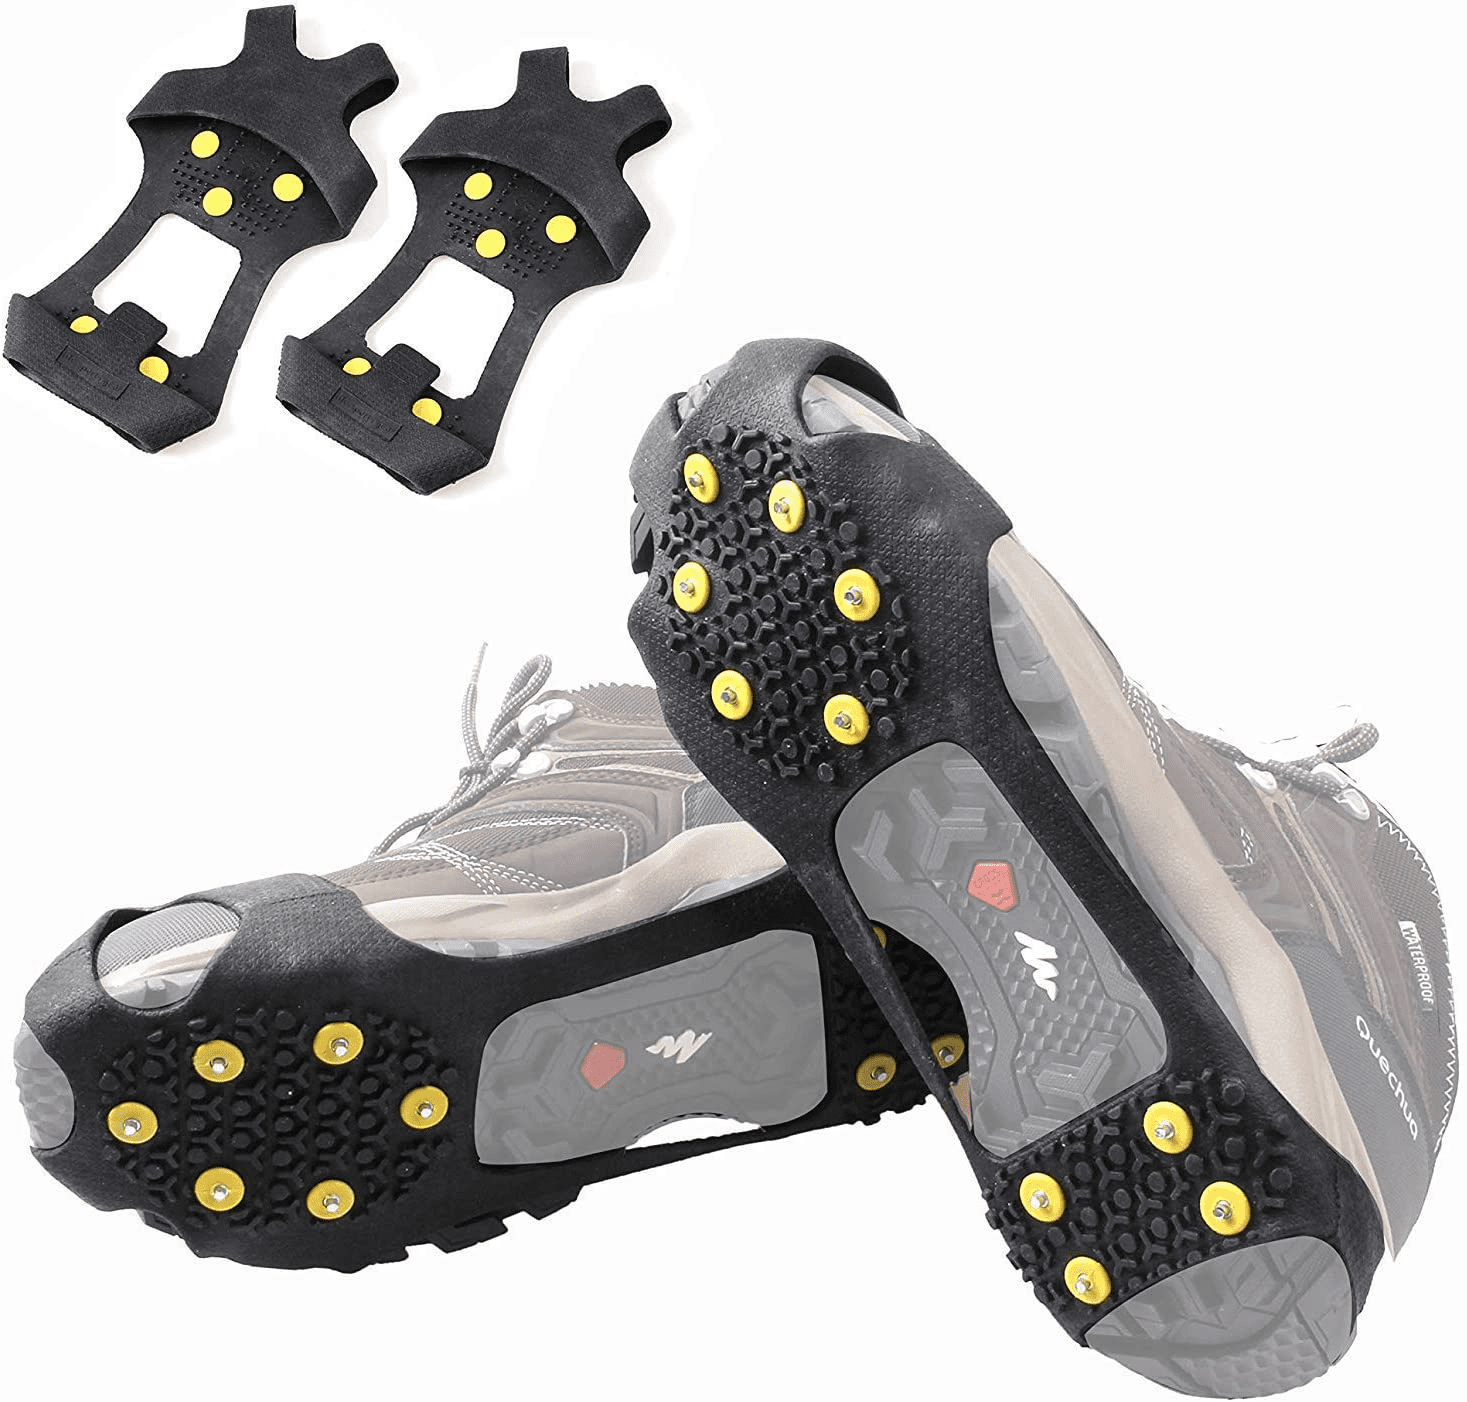 1 Pair 18Teeth Crampon Fishing Snow Shoes Spiked Cleat Anti‑Slip Snowshoes Cover 